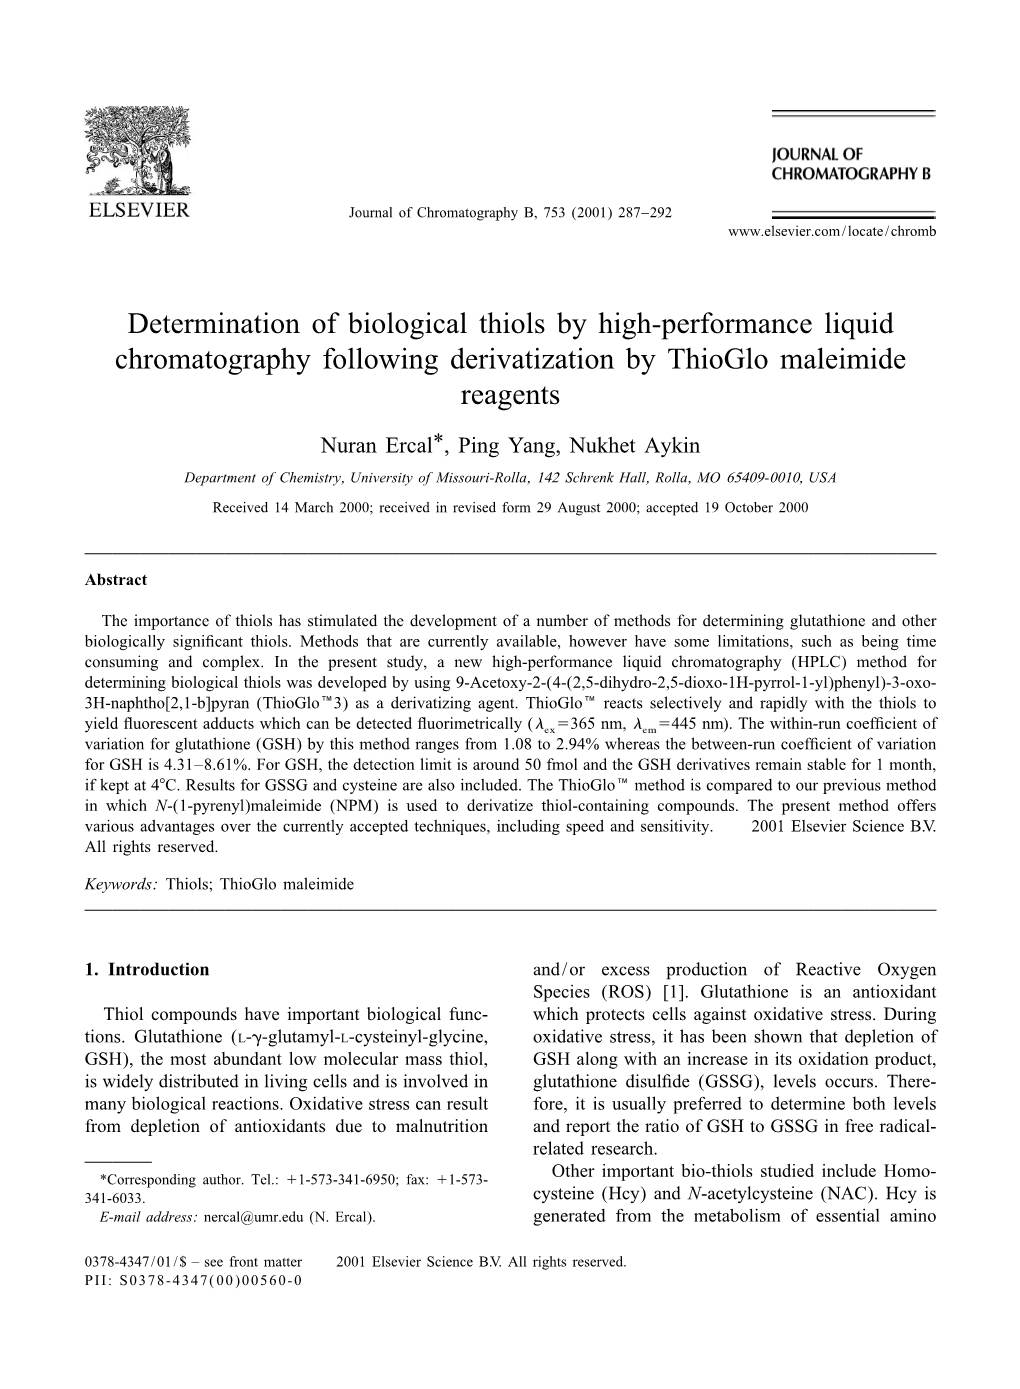 Determination of Biological Thiols by High-Performance Liquid Chromatography Following Derivatization by Thioglo Maleimide Reagents